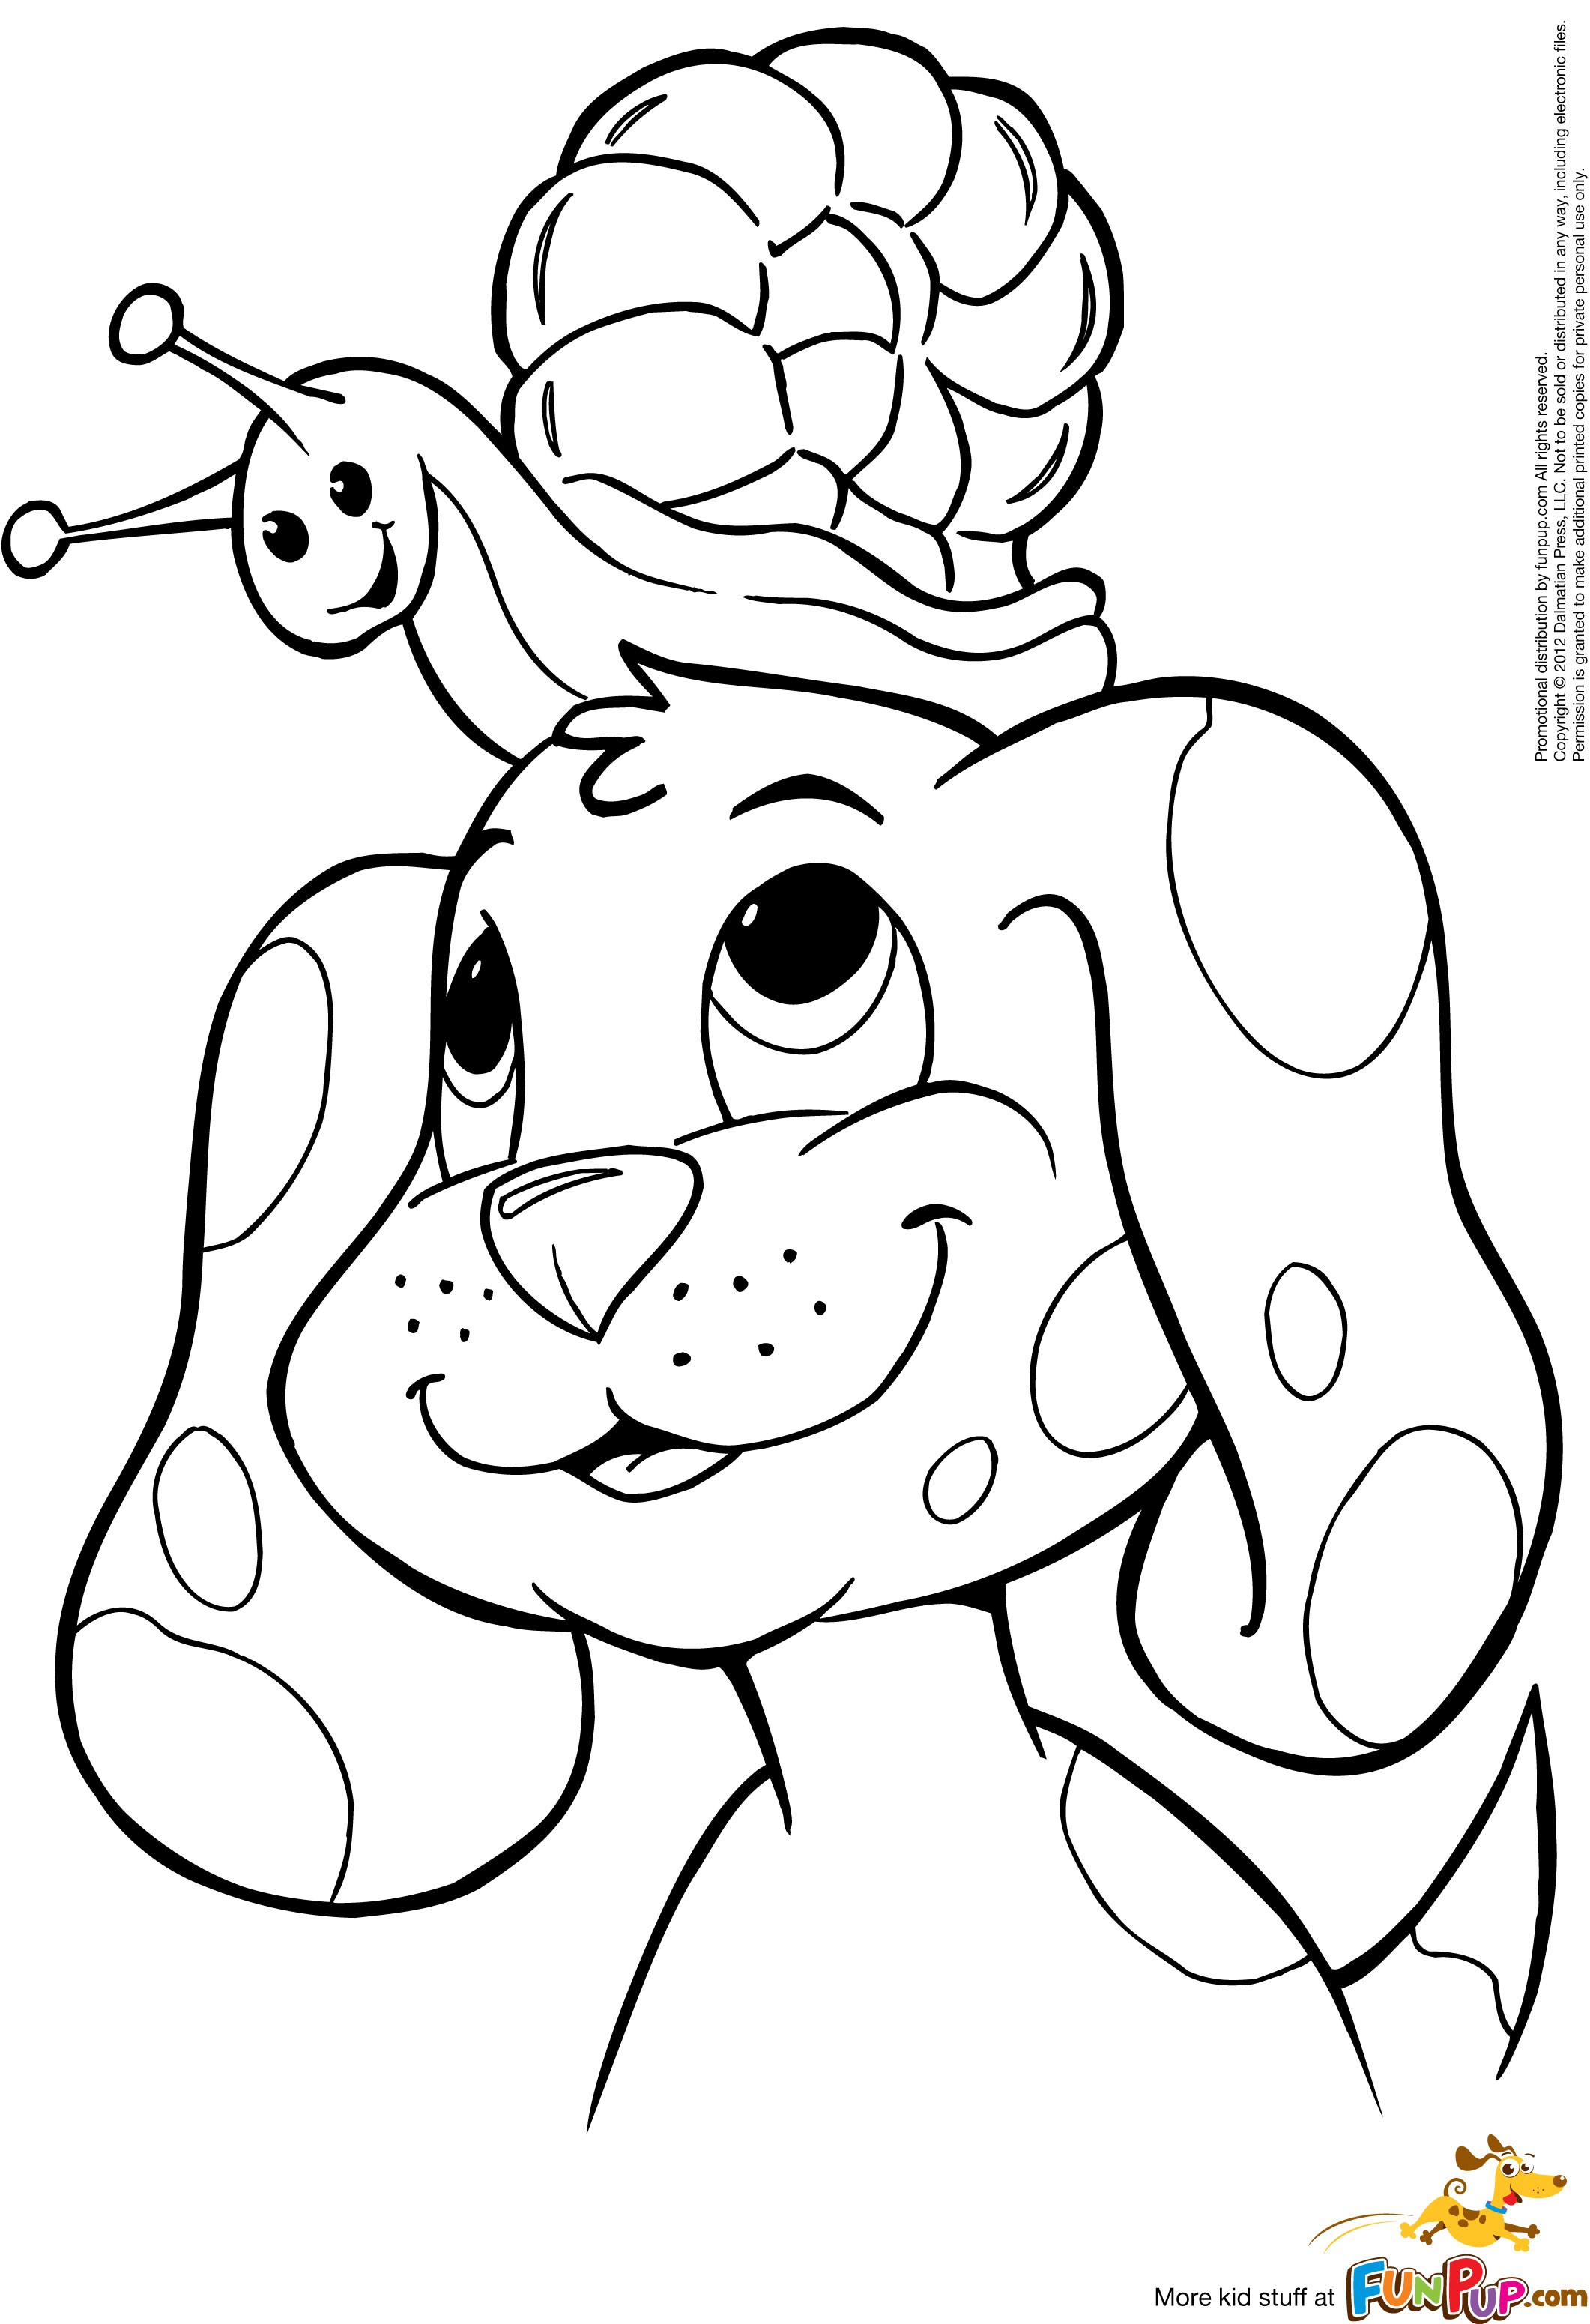 1000 Coloring Pages at GetColorings.com | Free printable colorings pages to print and color